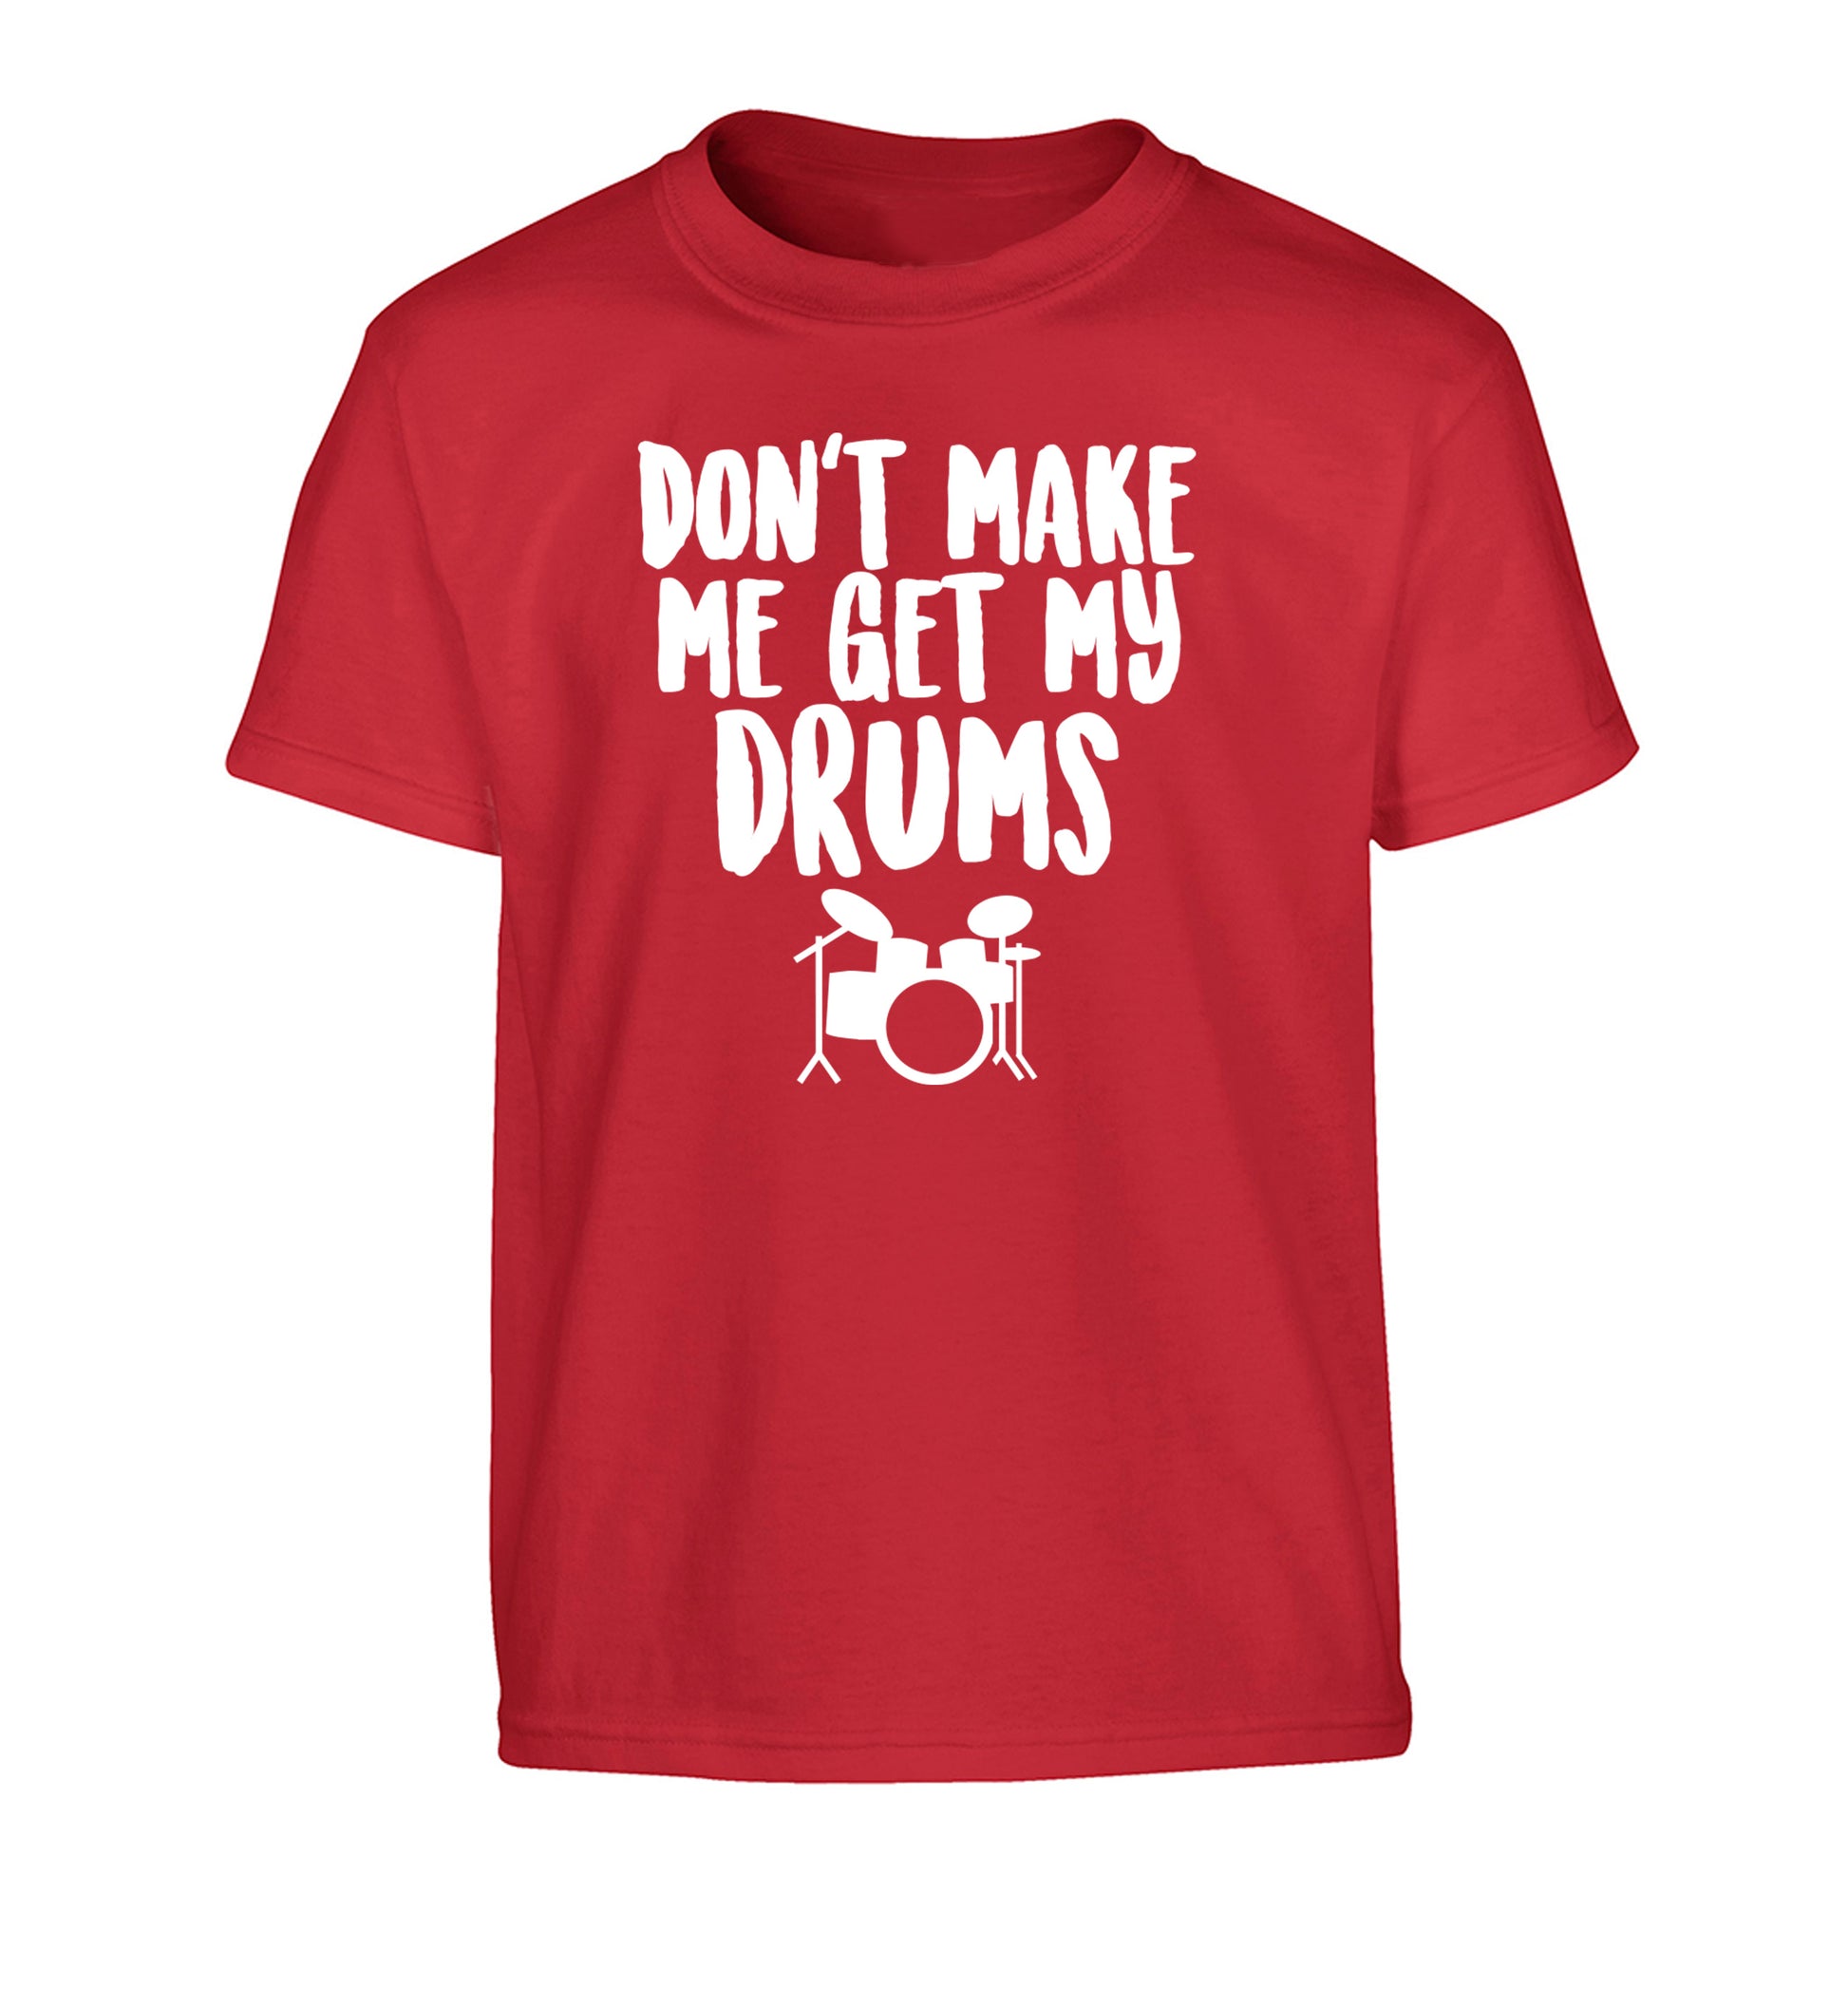 Don't make me get my drums Children's red Tshirt 12-14 Years